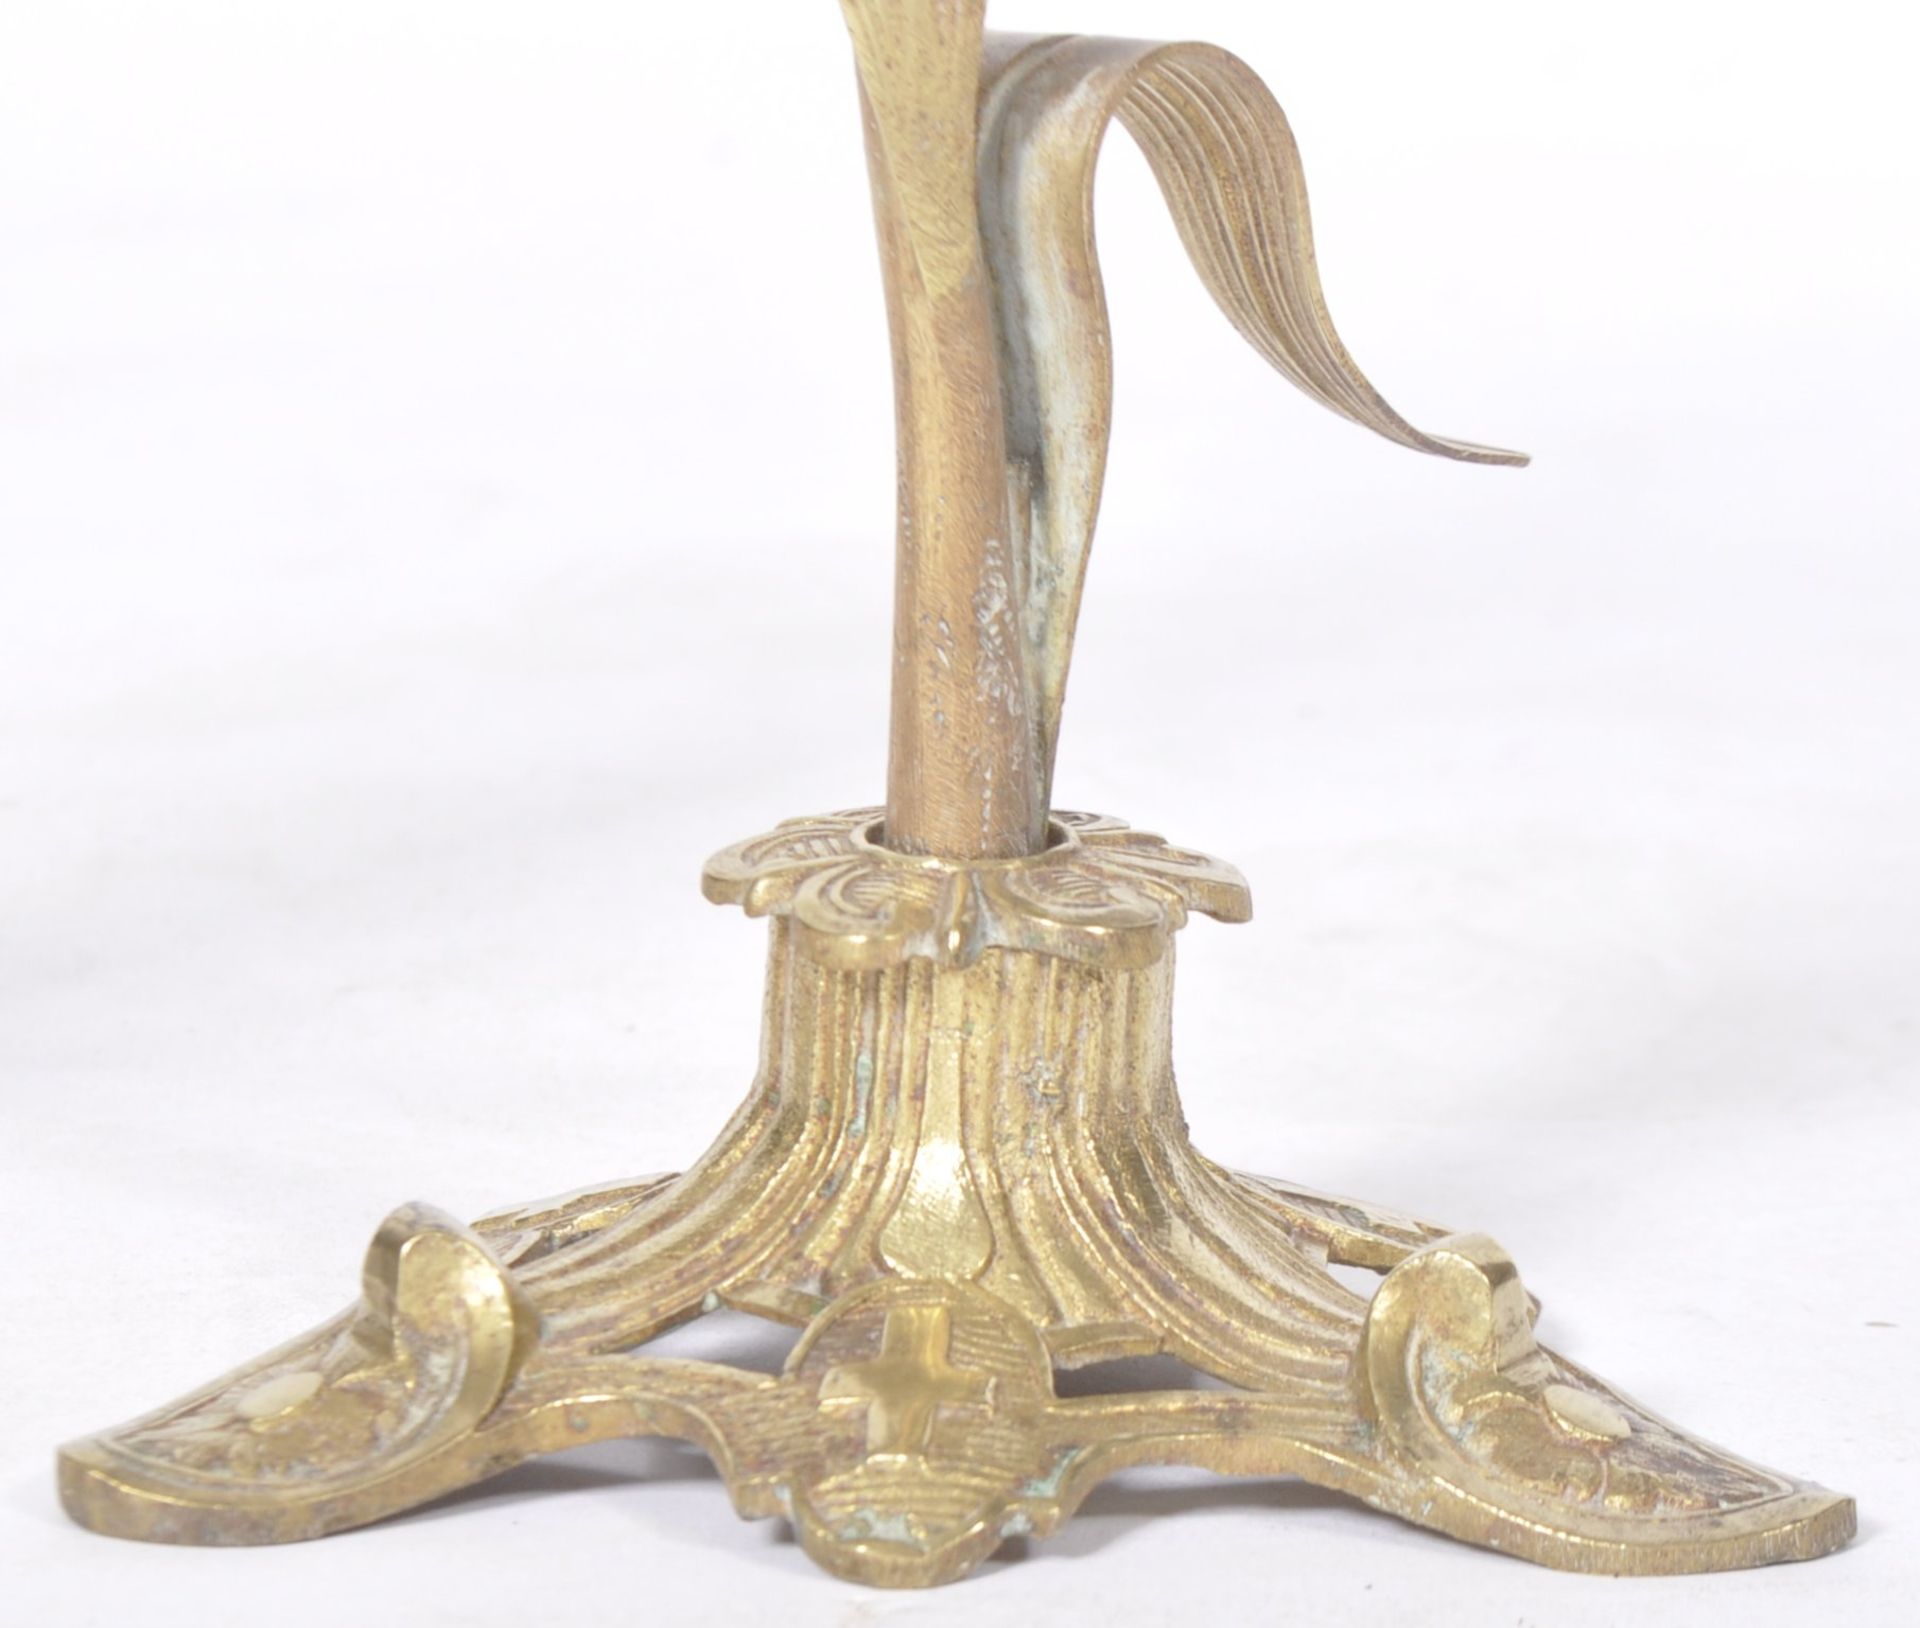 MATCHING PAIR OF 19TH CENTURY FRENCH BRASS CANDLESTICKS - Image 7 of 7